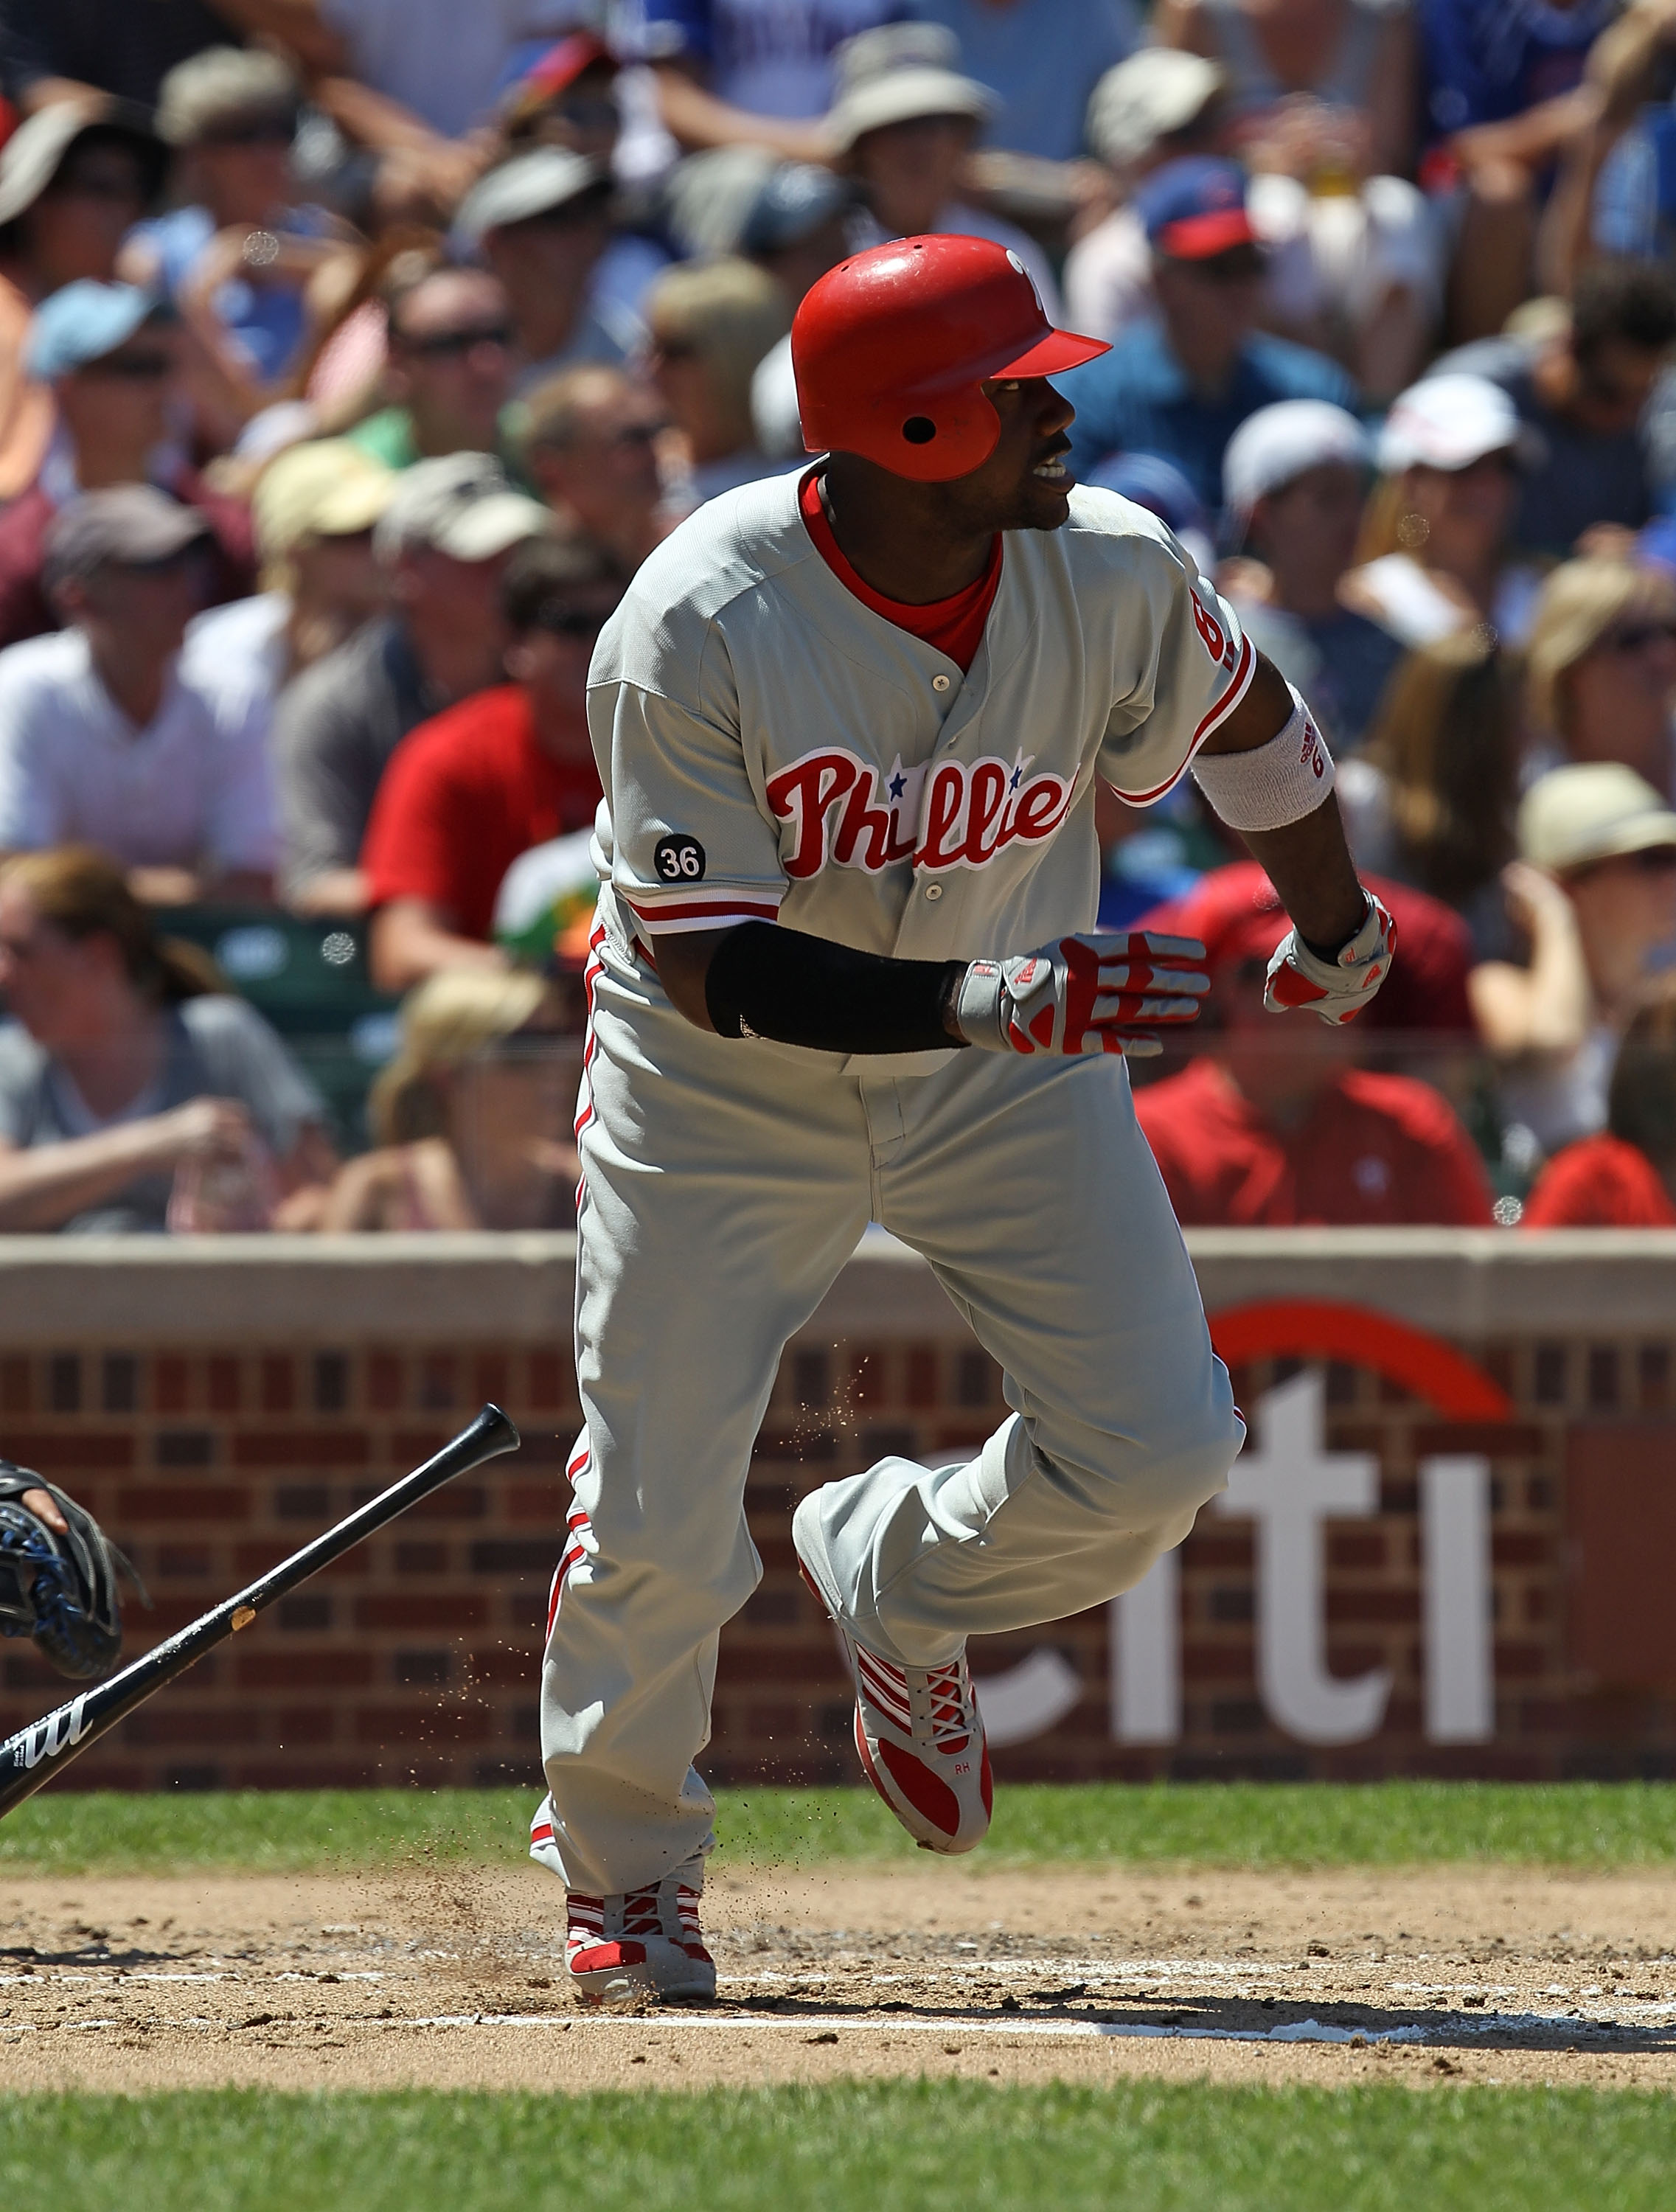 September Is the Hottest Month: Analyzing Ryan Howard's September